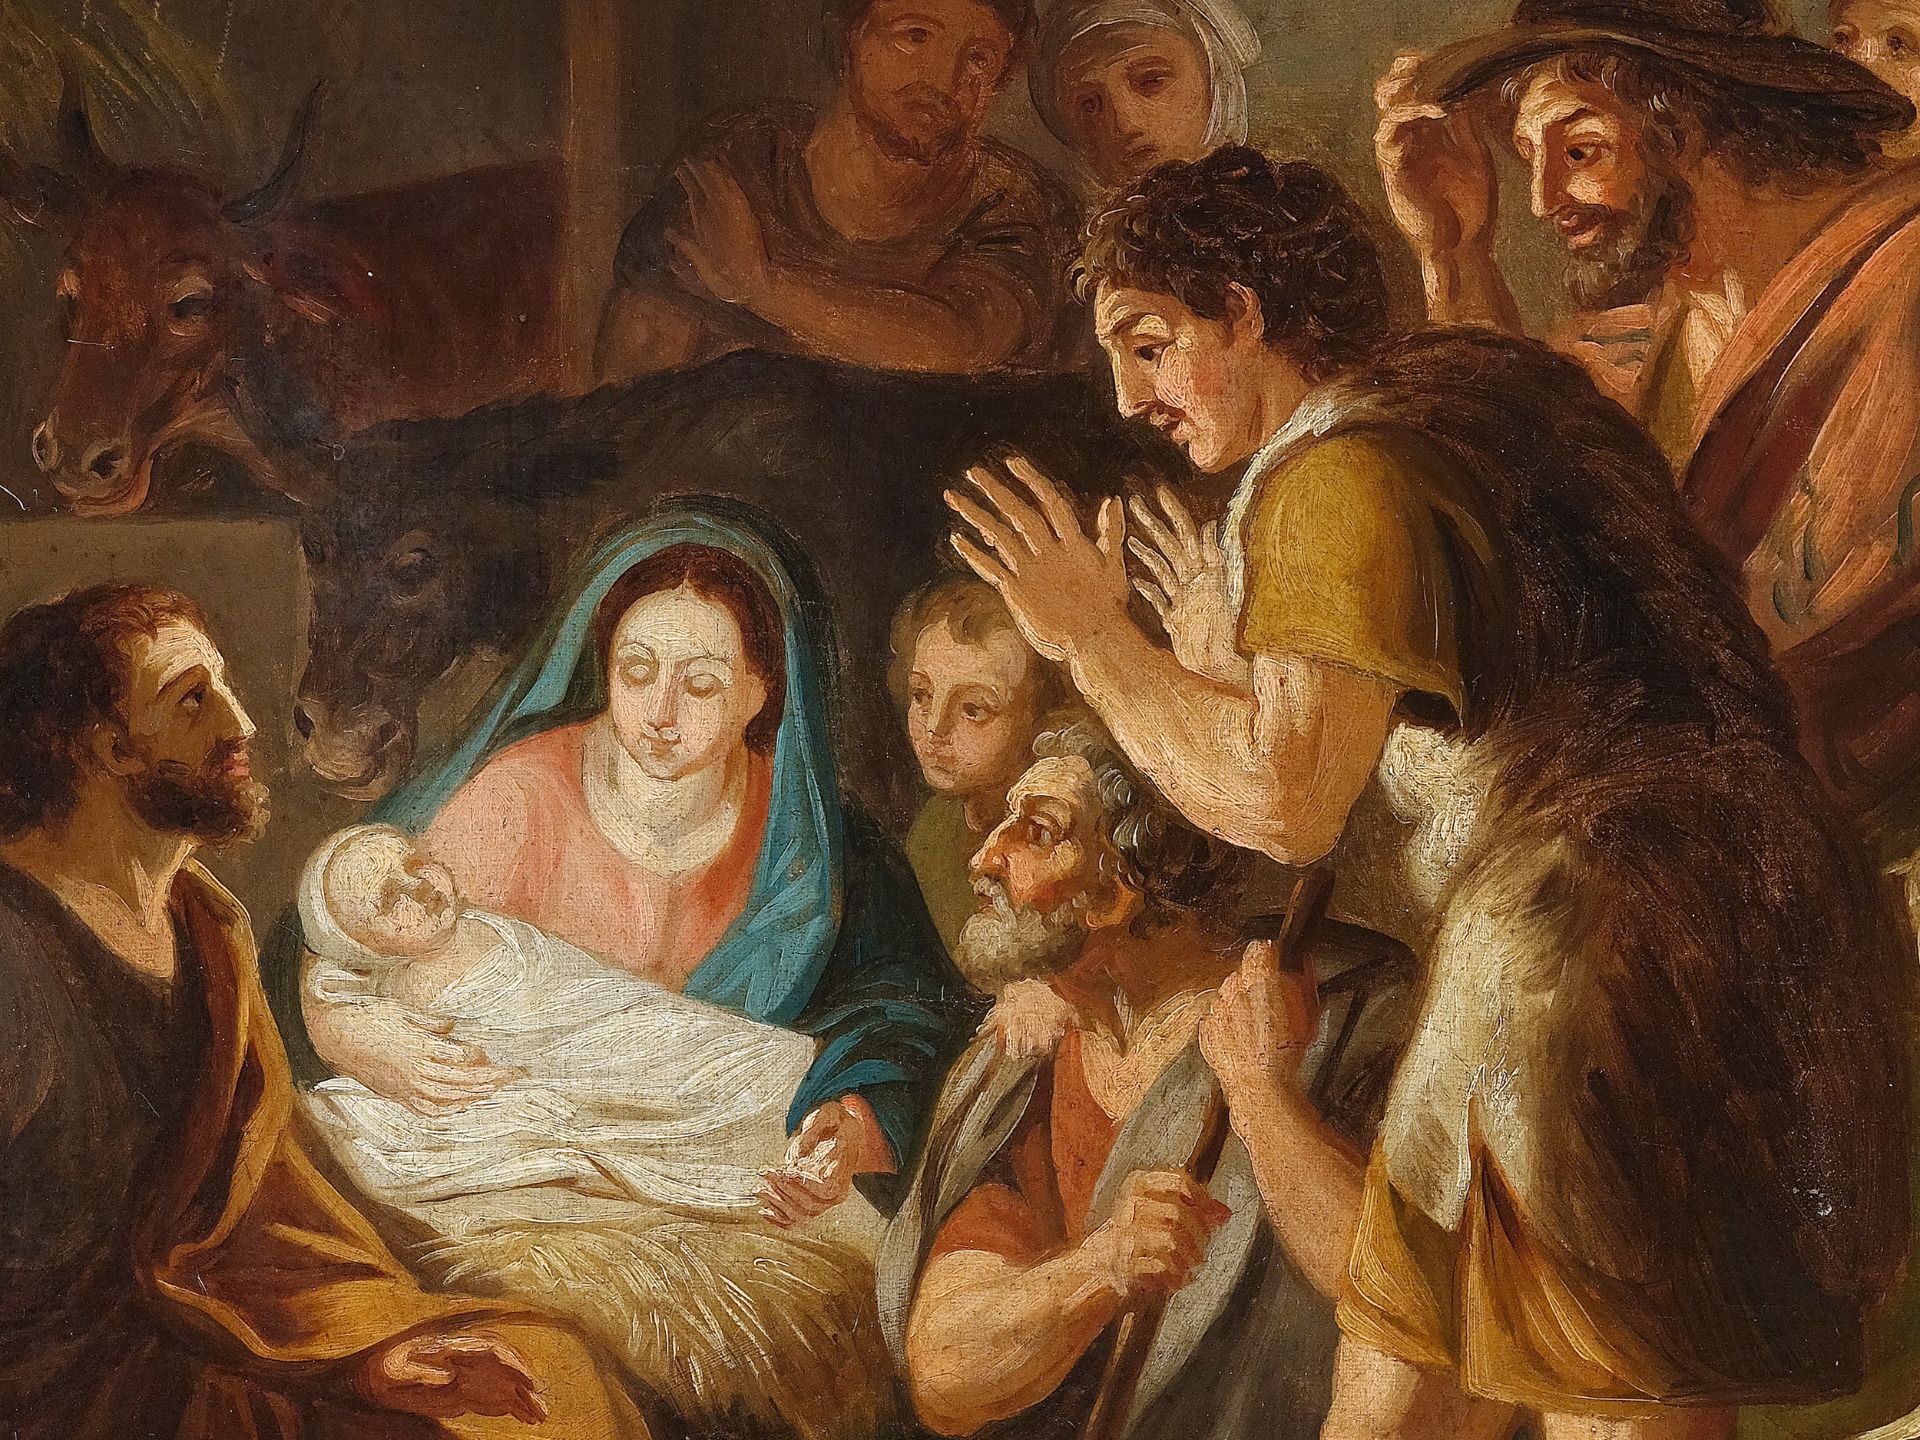 Unknown painter, Nativity, South German, 18th/19th century - Image 3 of 4